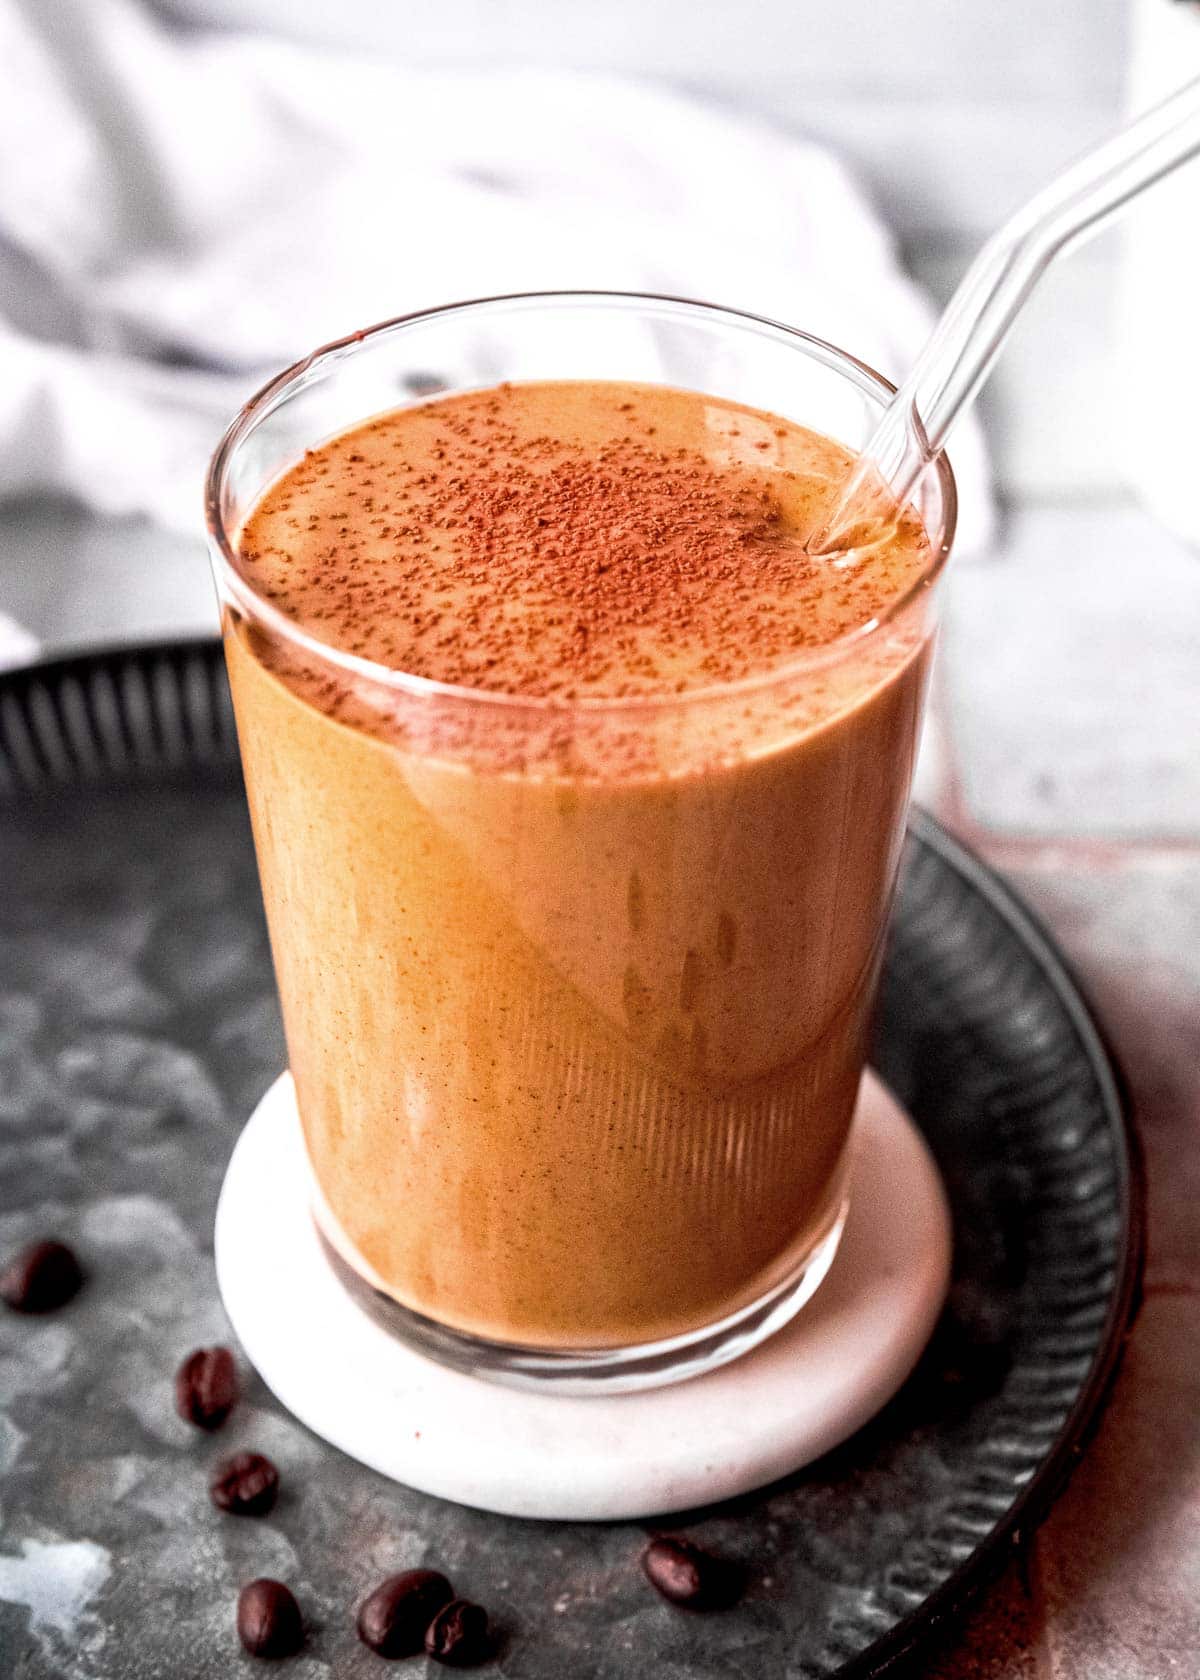 keto smoothie in a clear glass, dusted with cocoa powder